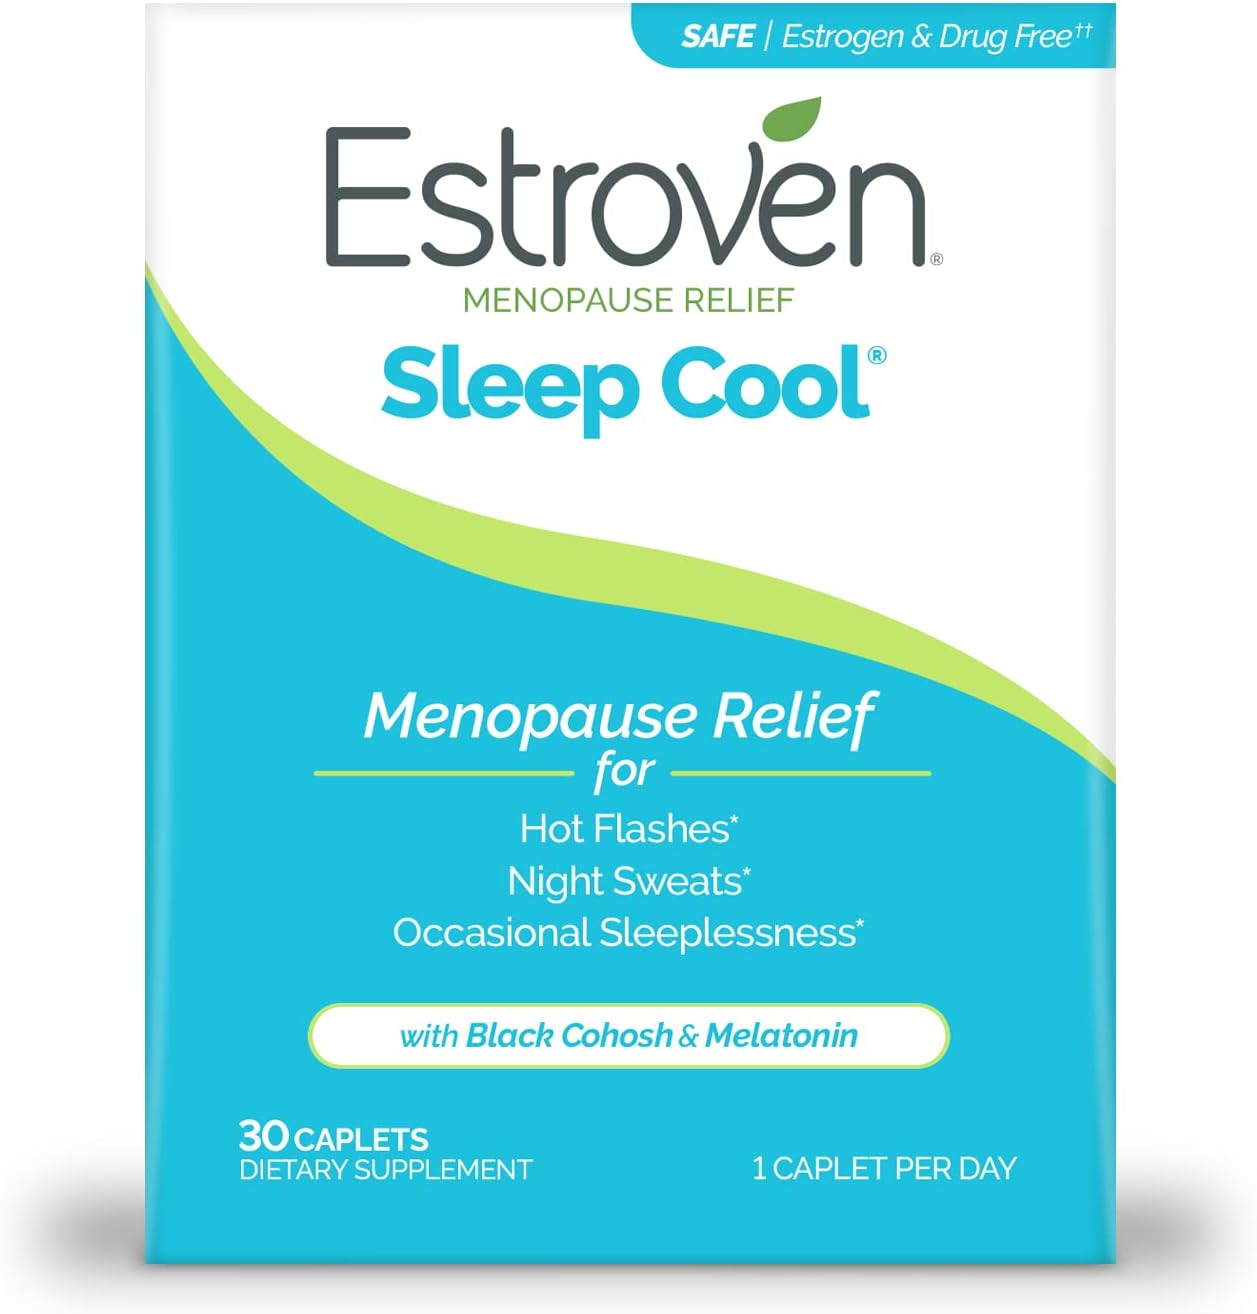 Estroven Sleep Cool For Menopause Relief, 30 Ct, Sleep Support Supplement With Clinically Proven Ingredients To Relieve Menopause Symptoms Plus Night Sweats  Hot Flash Relief, Drug-Free  Gluten-Free